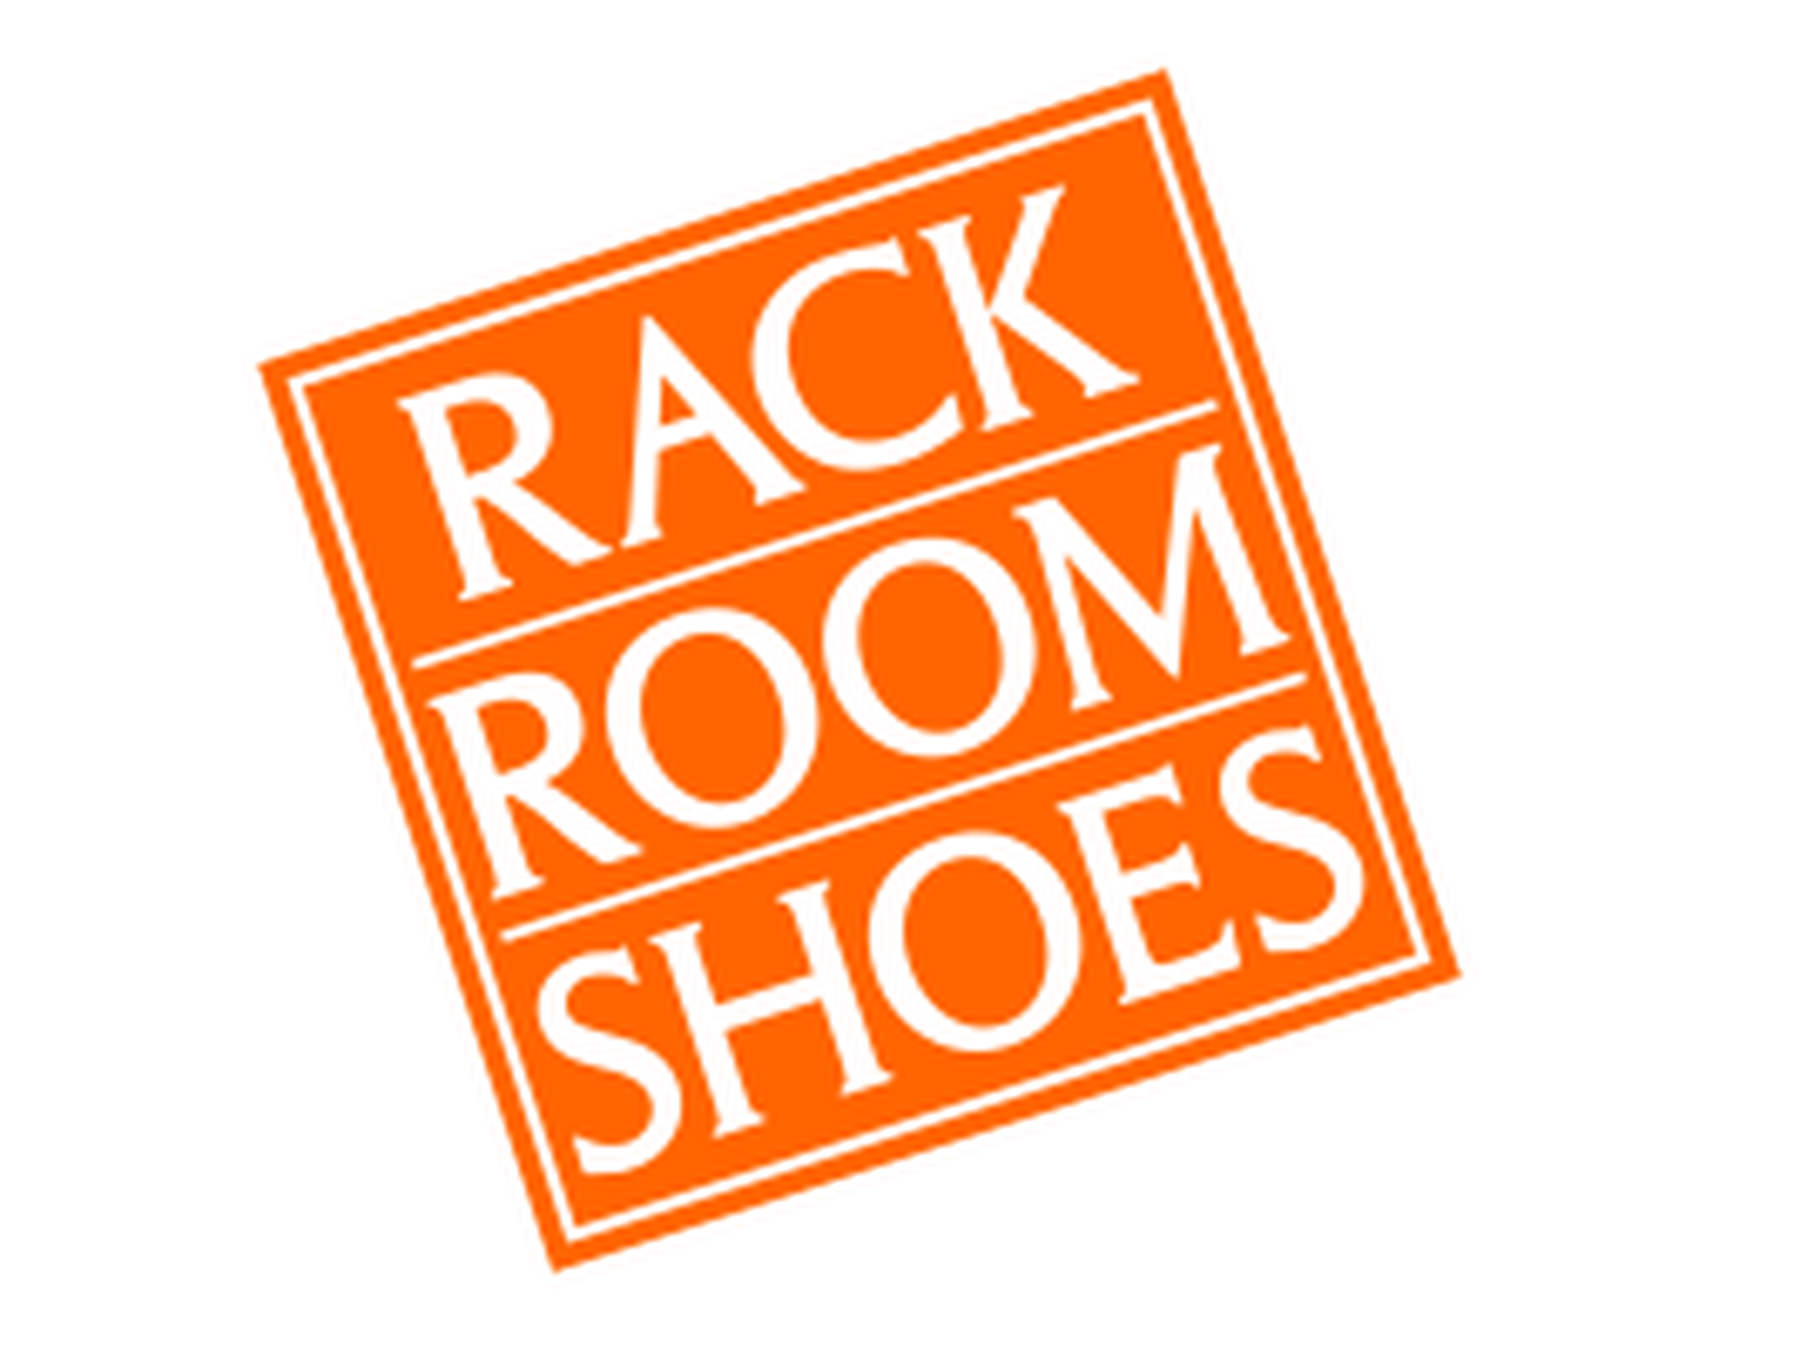 Rack Room Shoes Coupons